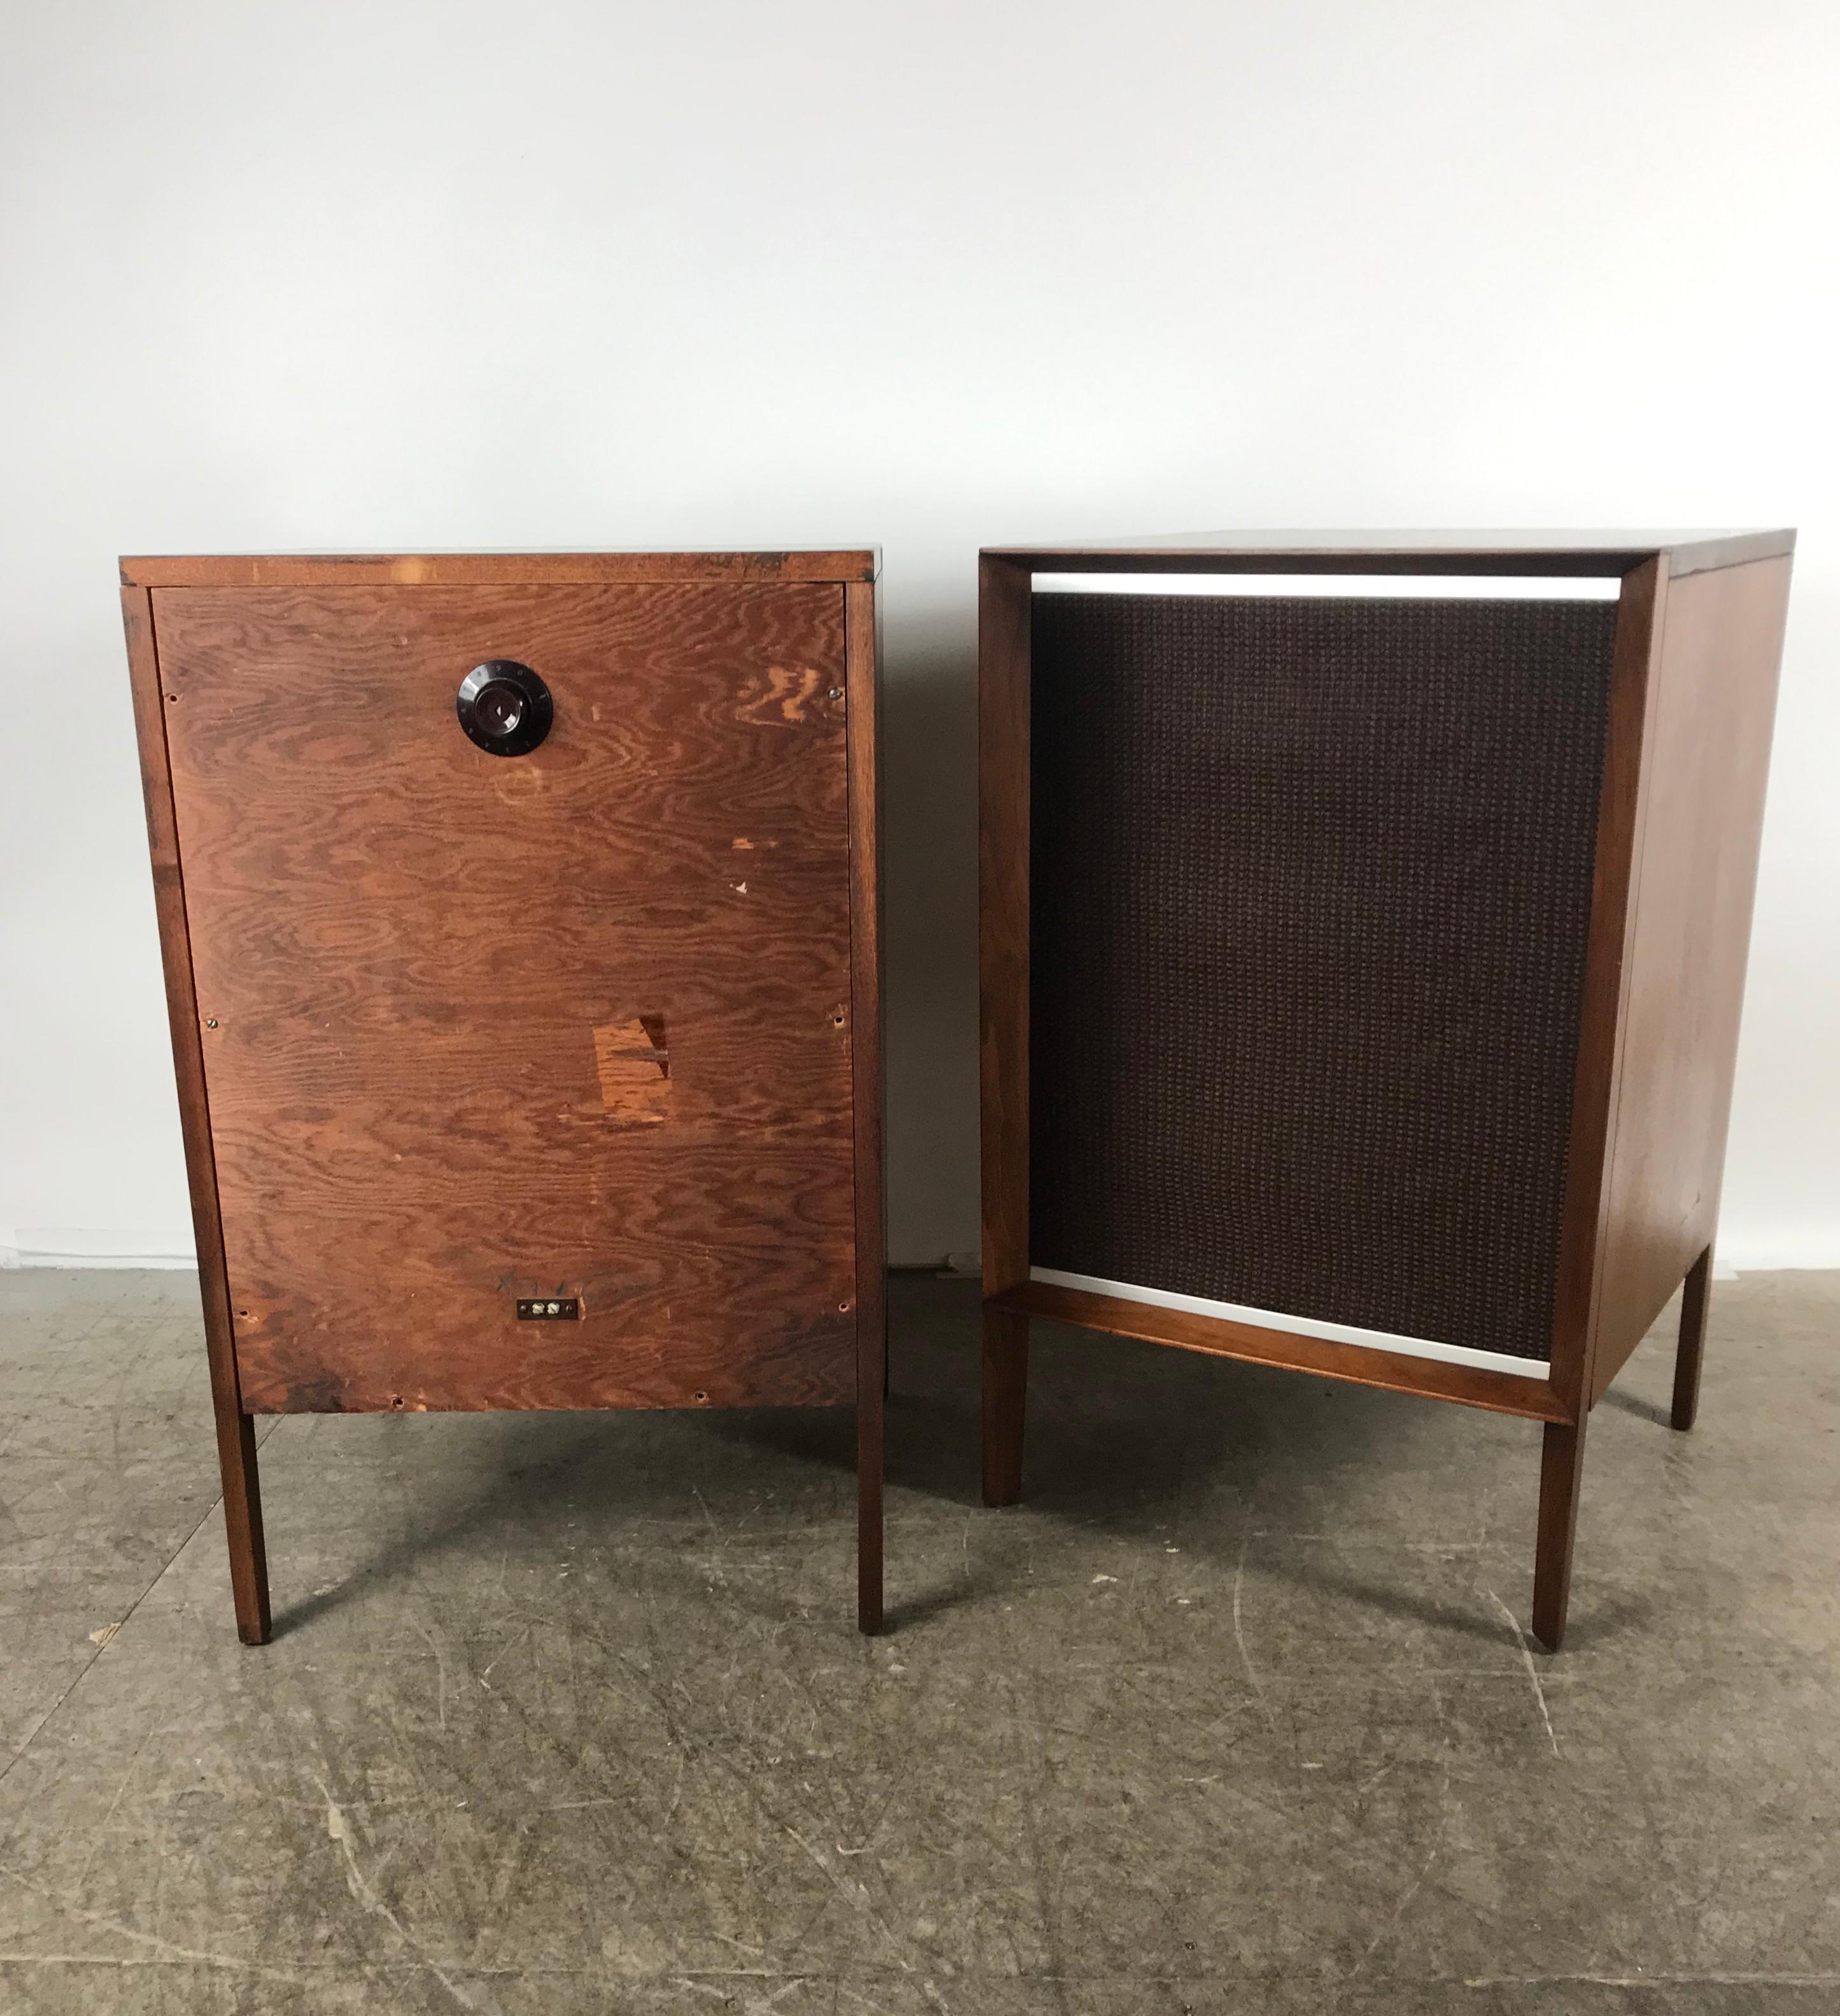 Stunning Stylized Mid-Century Modern Electro Voice Stereo Speakers in Walnut In Good Condition For Sale In Buffalo, NY